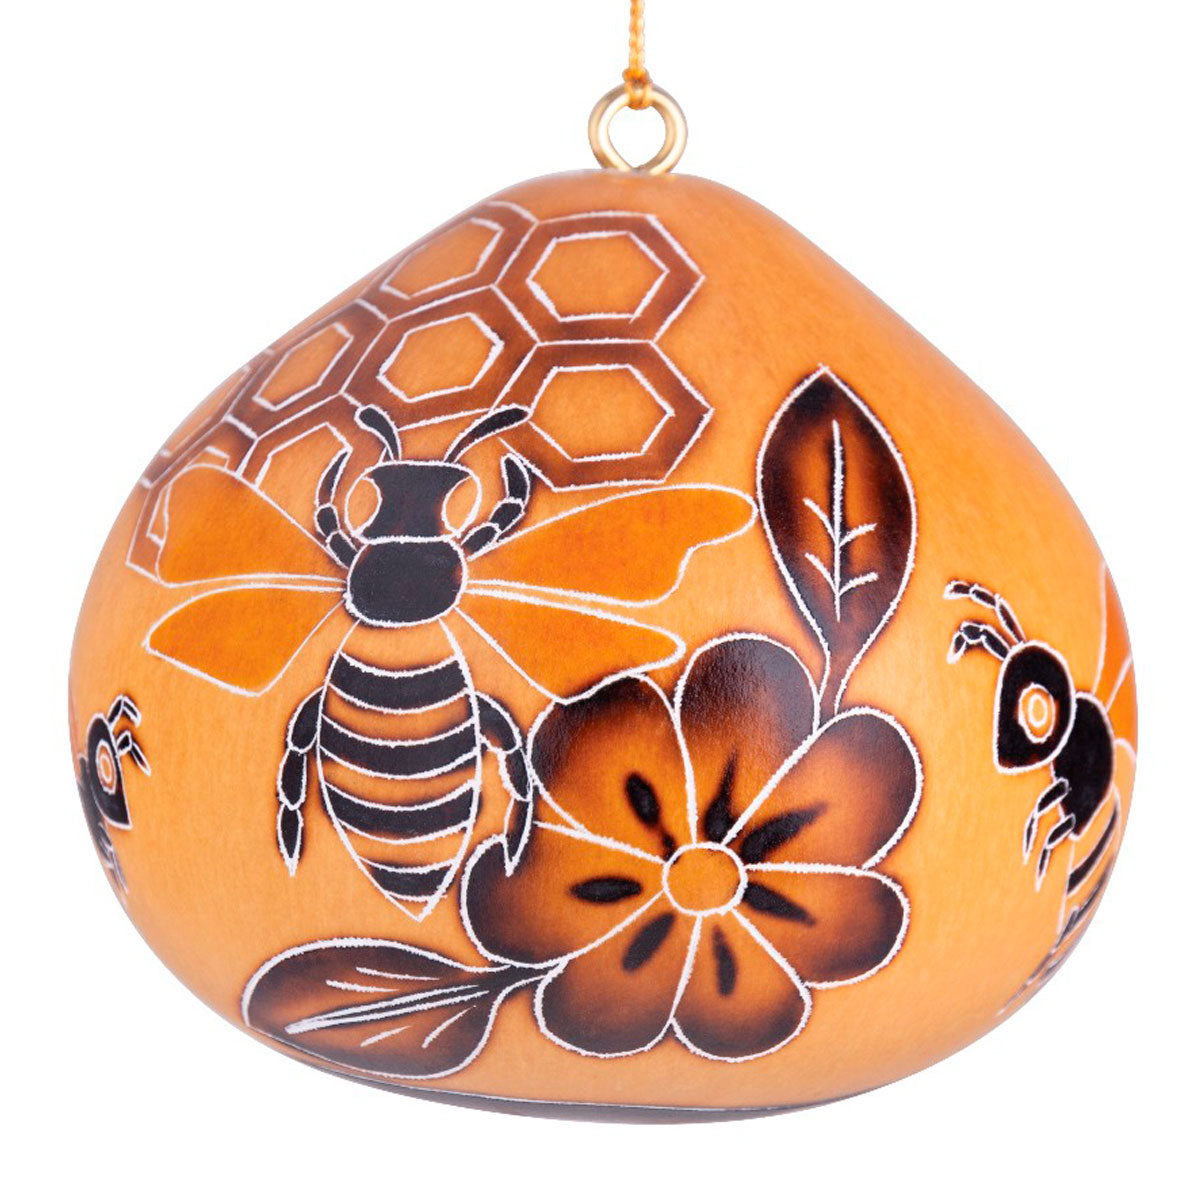 Beehive - Gourd Ornament